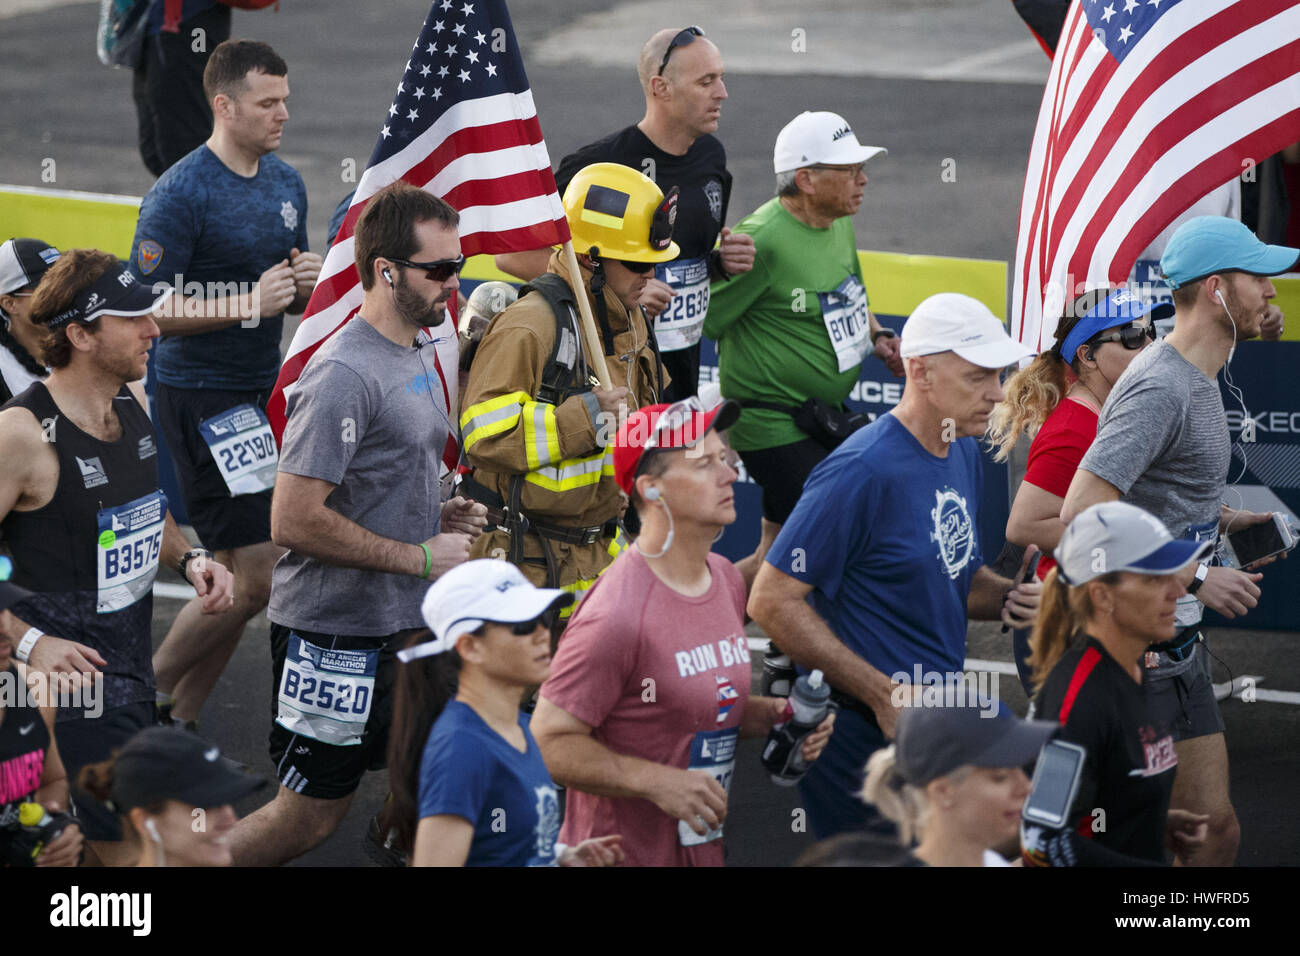 Los Angeles, CA, USA. 19th Mar, 2017. A firefighter runner wearing full turnout gear runs at the start of the 32nd annual Los Angeles Marathon at Dodger Stadium on Sunday morning, March 19, 2017 in Los Angeles, Calif. The 26.2-mile ''Stadium to the Sea'' route begins at Dodger Stadium and ends at Ocean and California avenues in Santa Monica. © 2017 Patrick T. Fallon Credit: Patrick Fallon/ZUMA Wire/Alamy Live News Stock Photo